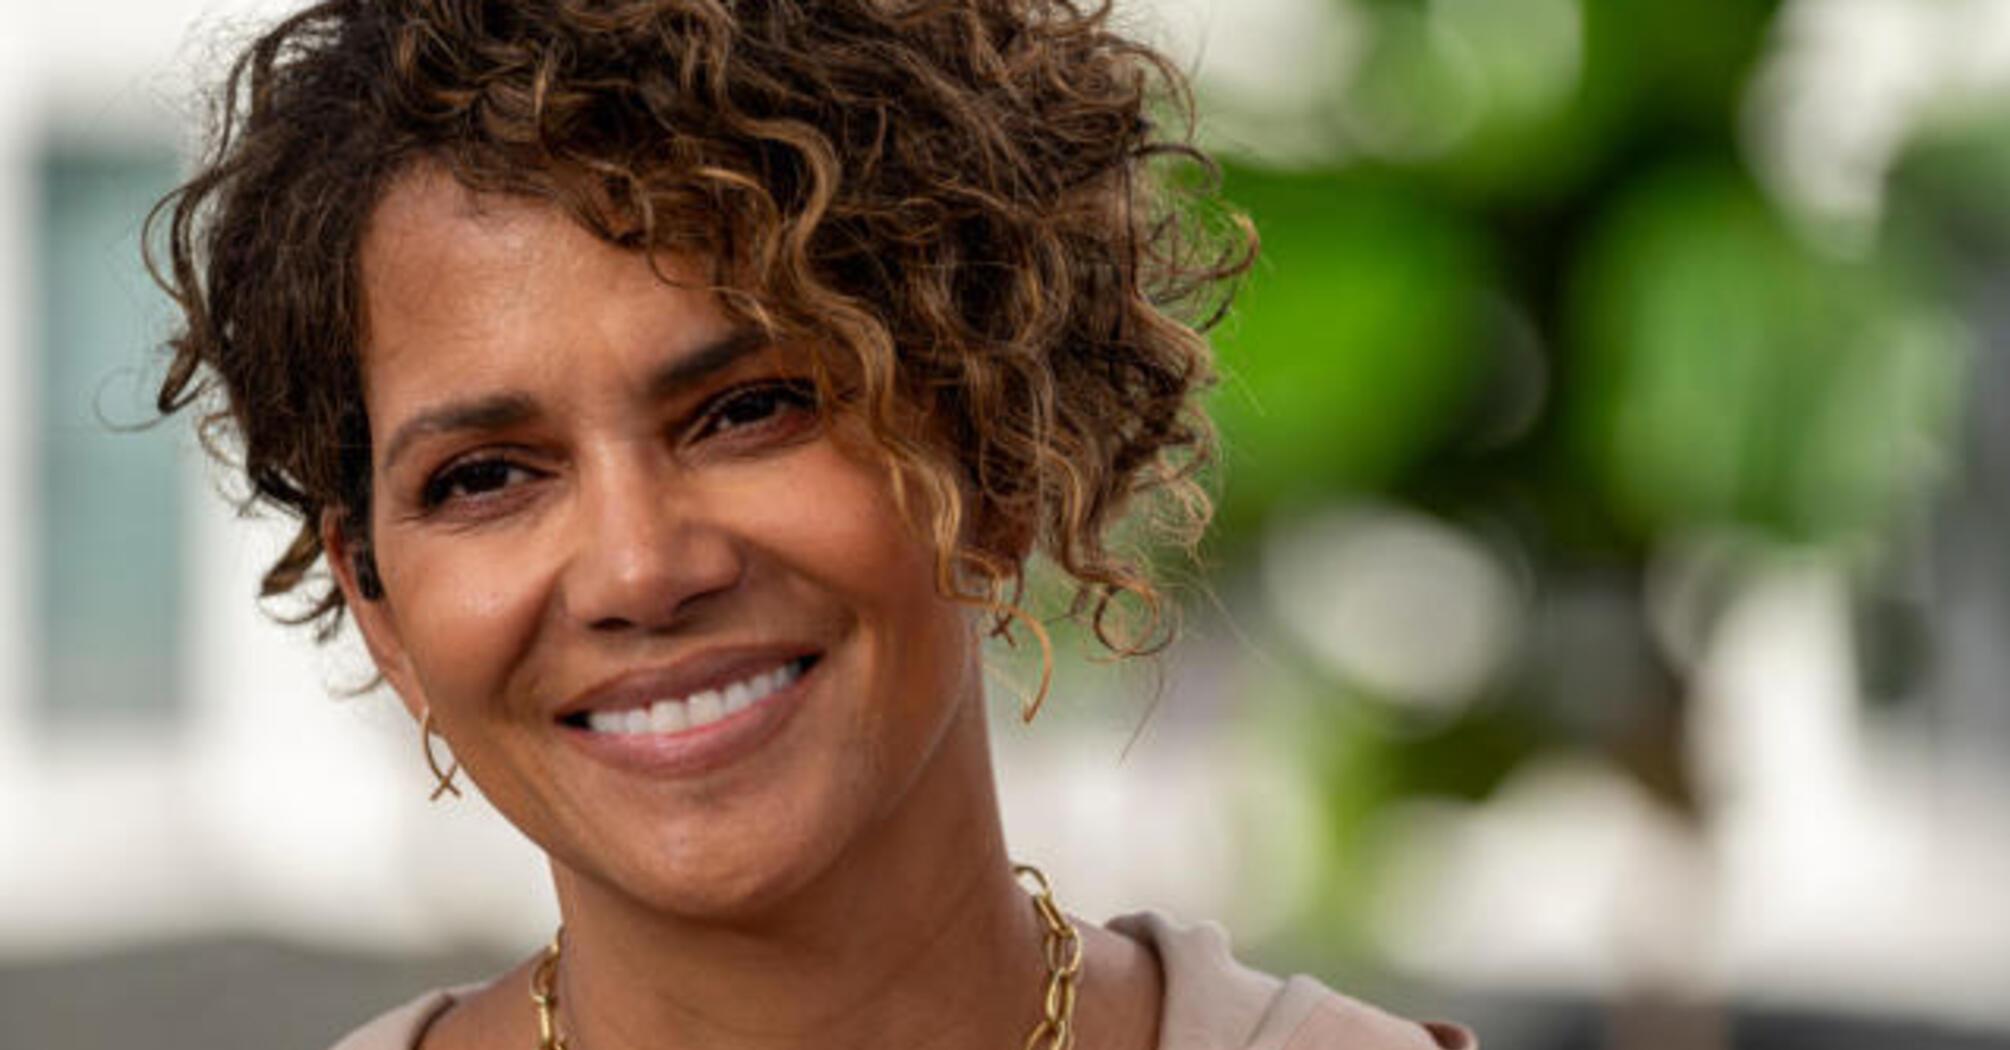 10 facts about Halle Berry